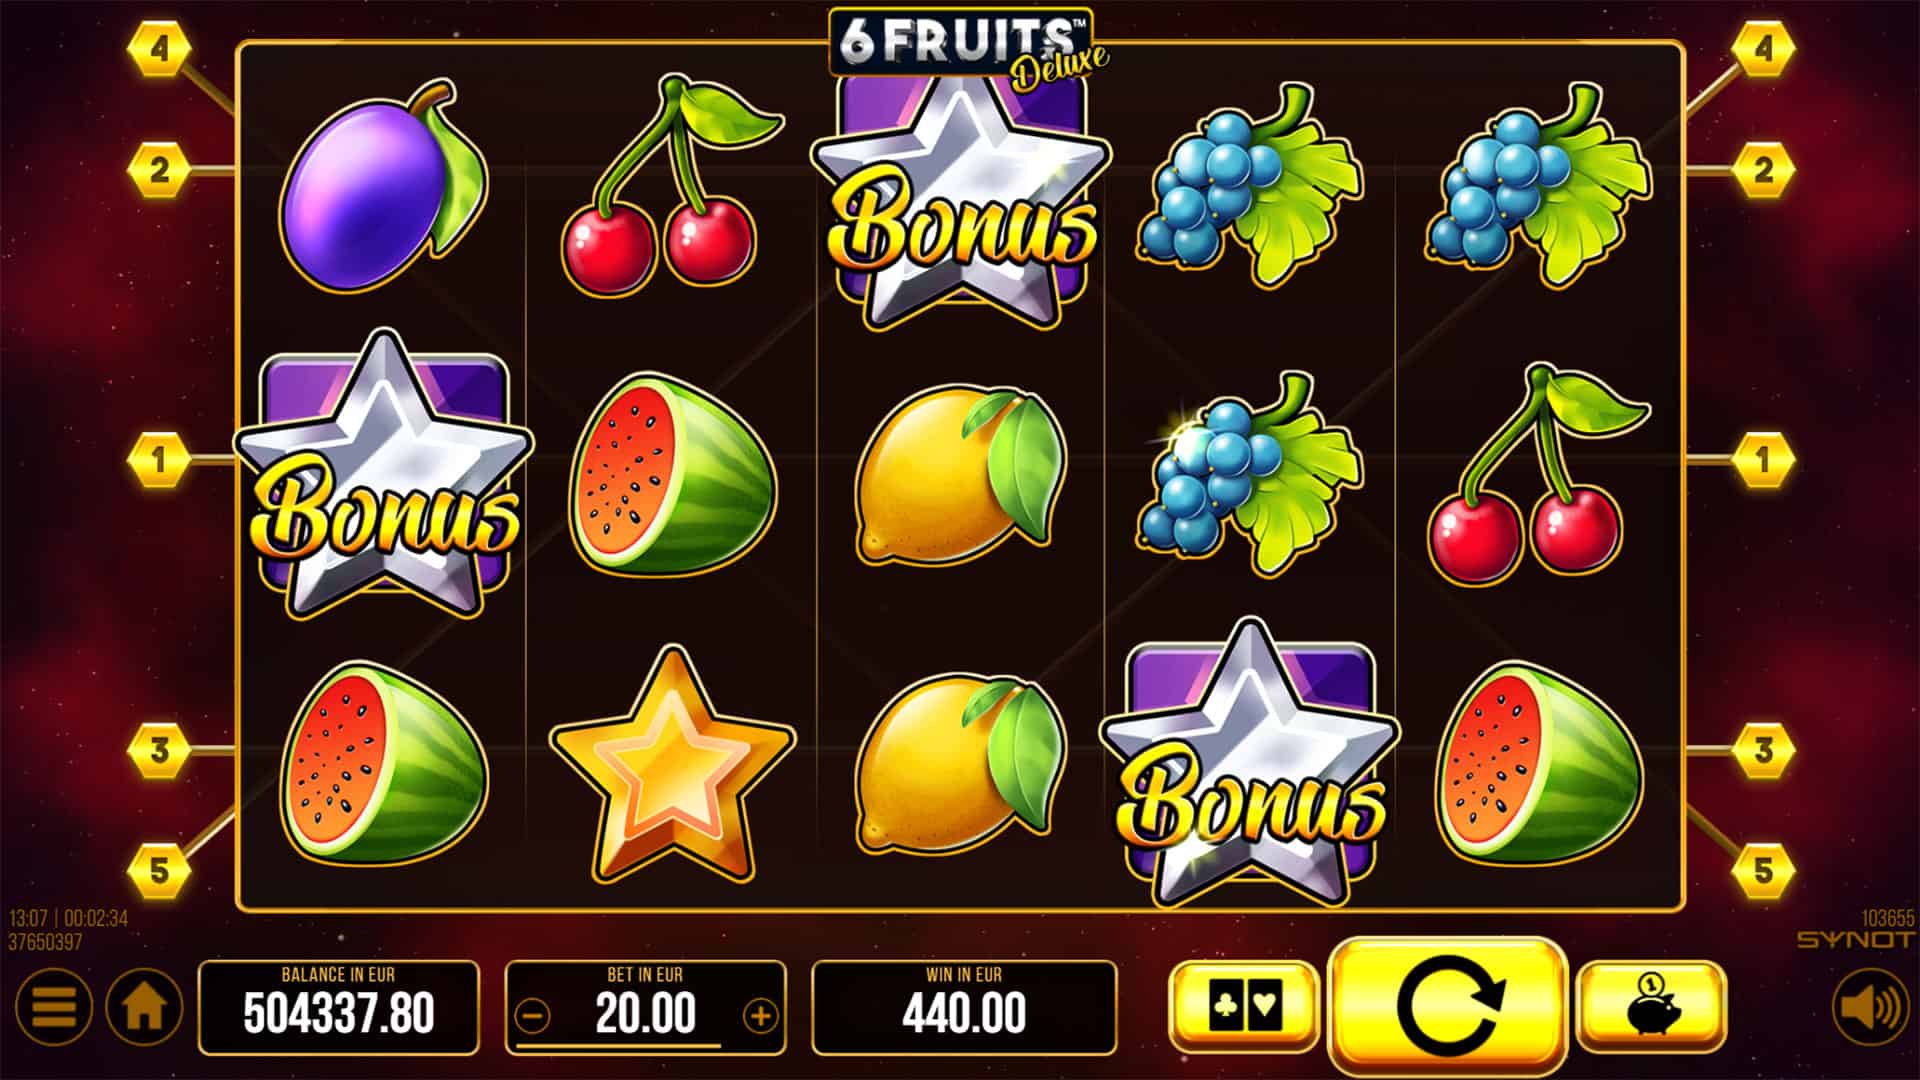 Pratinjau slot SYNOT Games 6 Fruits Deluxe